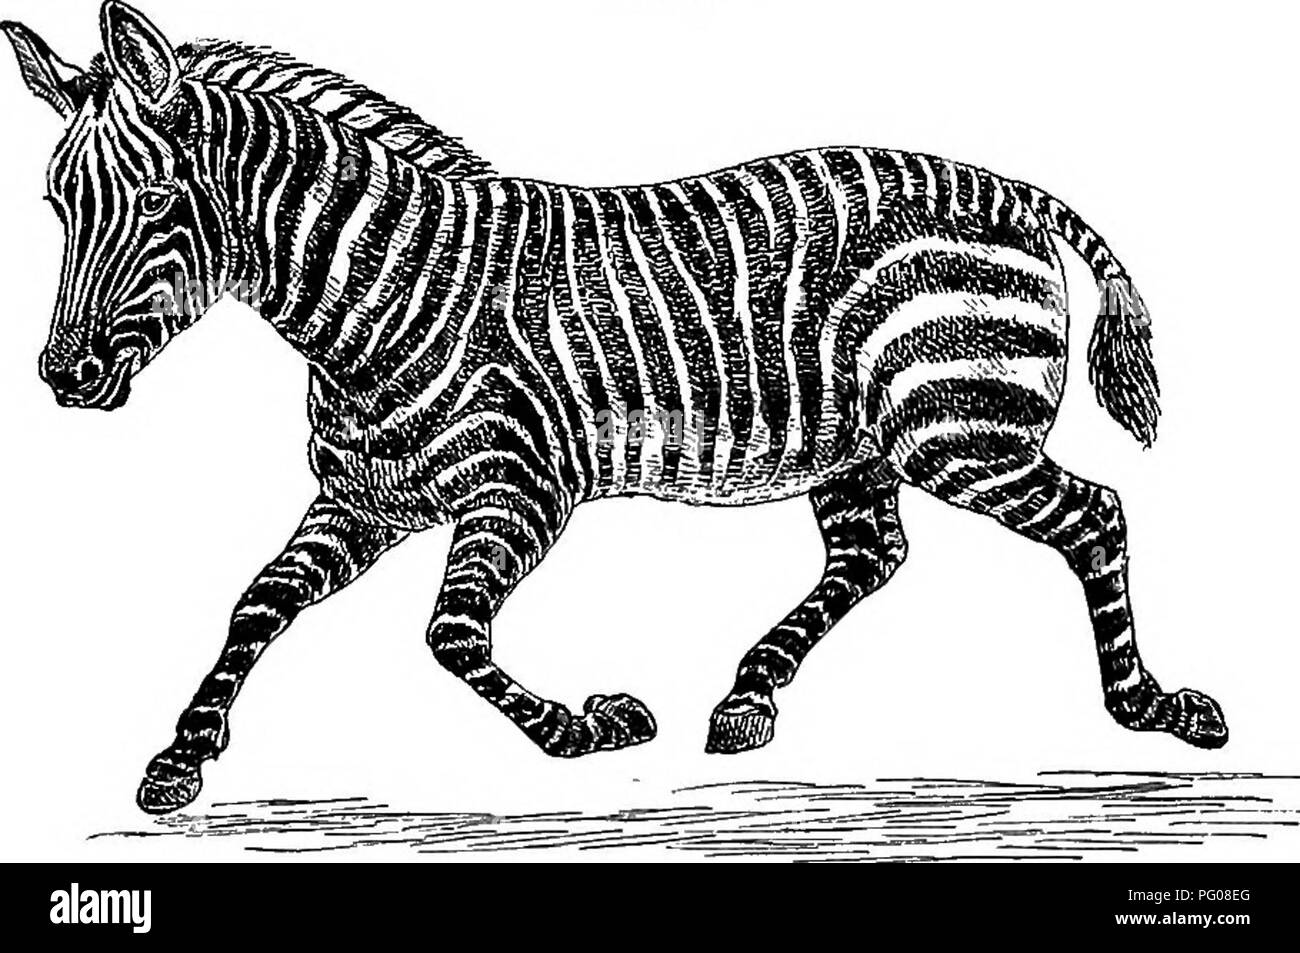 . American types of animal life. Zoology; Animal behavior. 204 TYPES OF ANIMAL LIFE are, or till recently were, four wild striped creatures of the horse family in Africa: These were i. The quagga, with stripes only on the head, neck, and fore part of the body. But a few years ago it was to be met with in great herds, ranging the vast plains which stretch between Cape Colony and the Vaal lliver. Now, however, it is a question whether any exist save in a few menageries. They have been trained to go in harness, although Fig. 57.. THE TRUE OR COMMON ZEBRA. never really domesticated. 2. The true ze Stock Photo